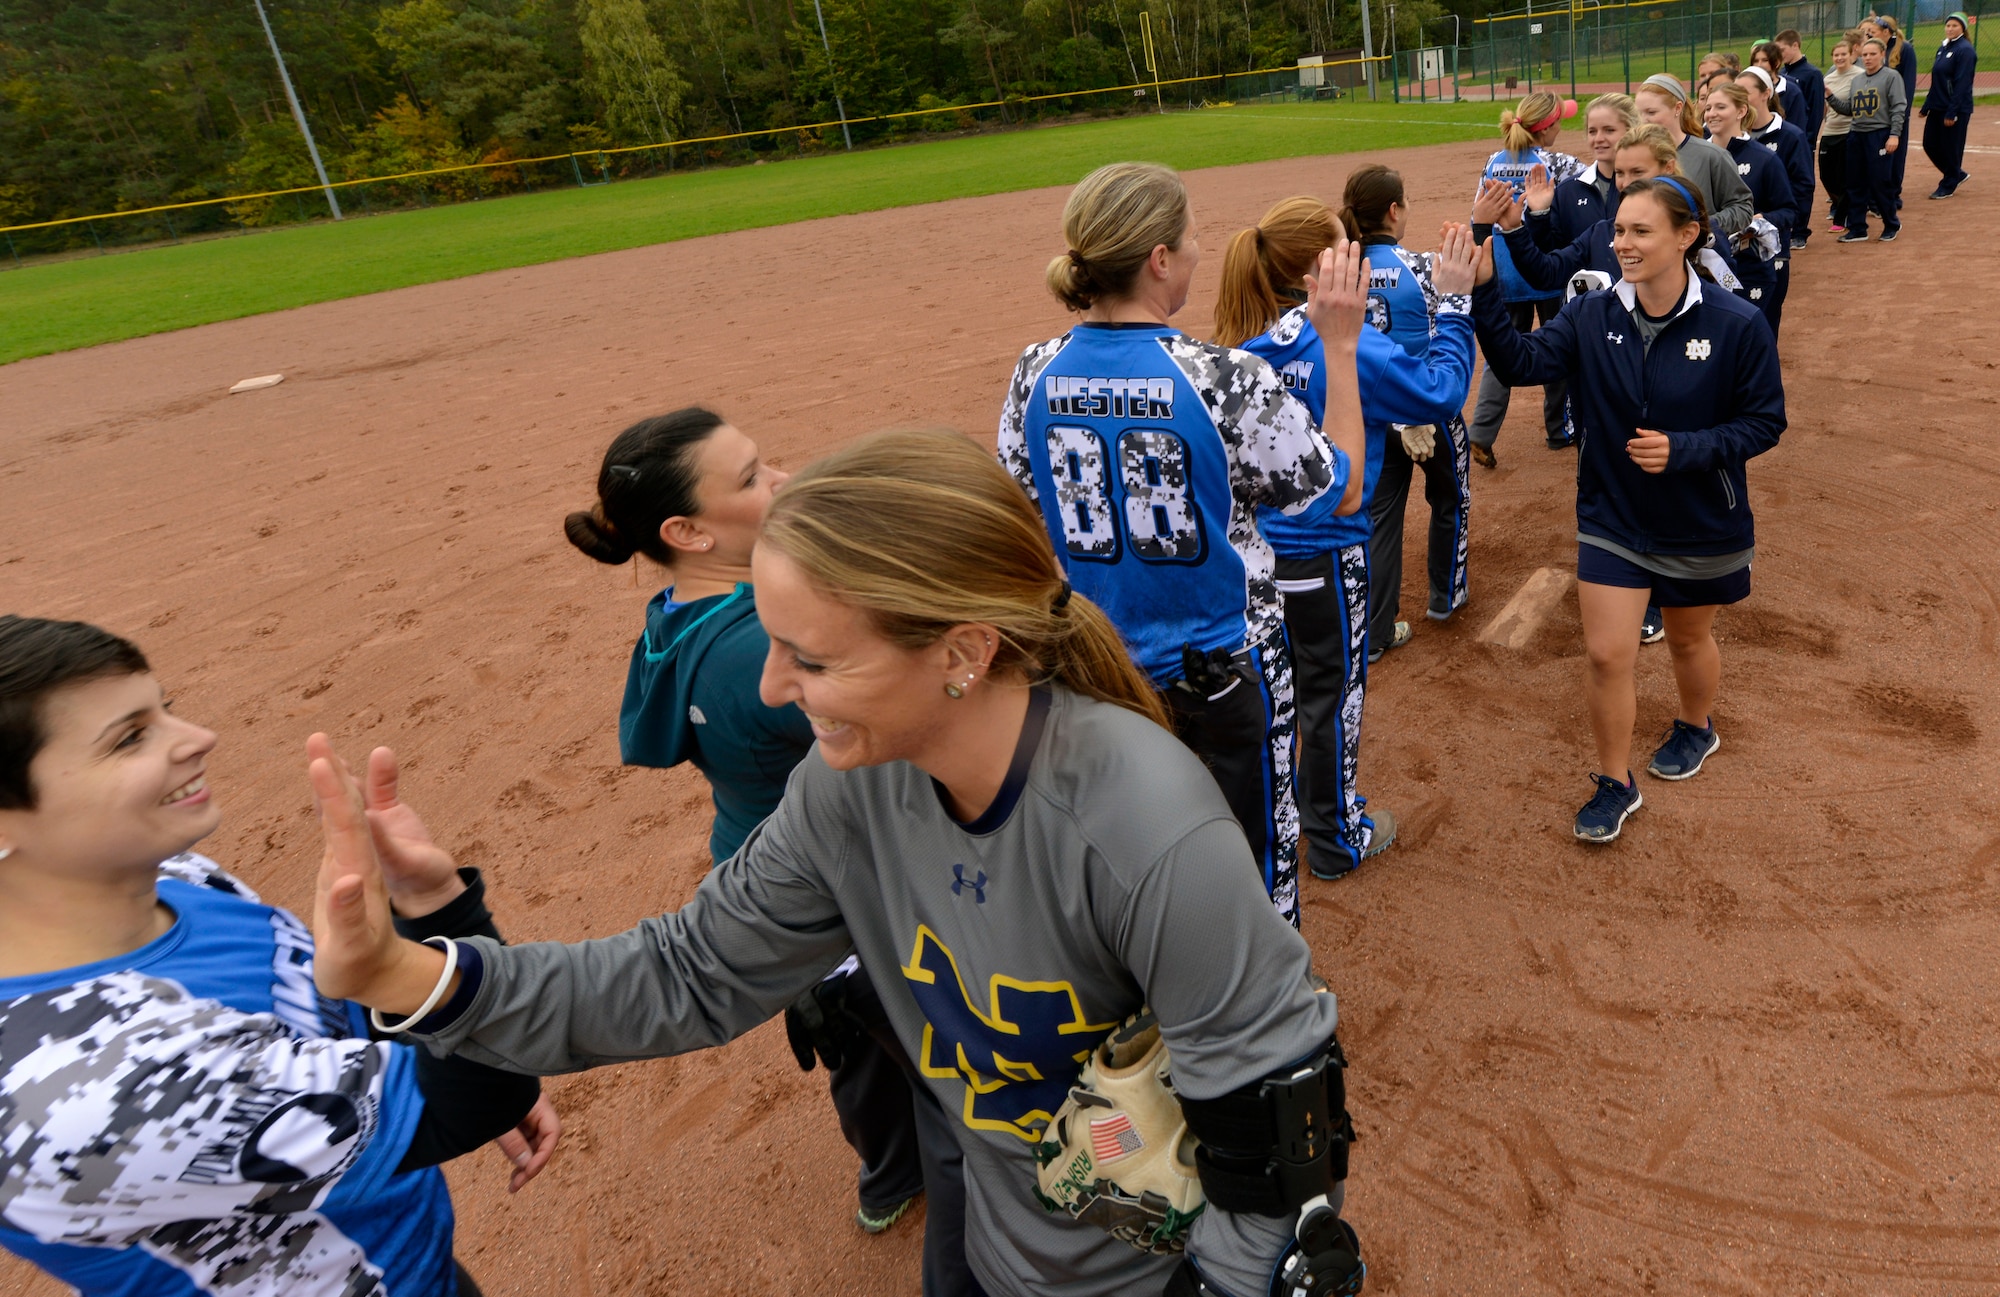 Members of the Ramstein Air Base Lady Rams and University of Notre Dame softball teams congratulate each other following a scrimmage Oct. 21, 2015, at Ramstein Air Base, Germany. The scrimmage was part of the Notre Dame softball team’s base visit during their 10-day European tour. The Lady Rams defeated Notre Dame by a score of 11-7. (U.S. Air Force photo/Staff Sgt. Sharida Jackson)